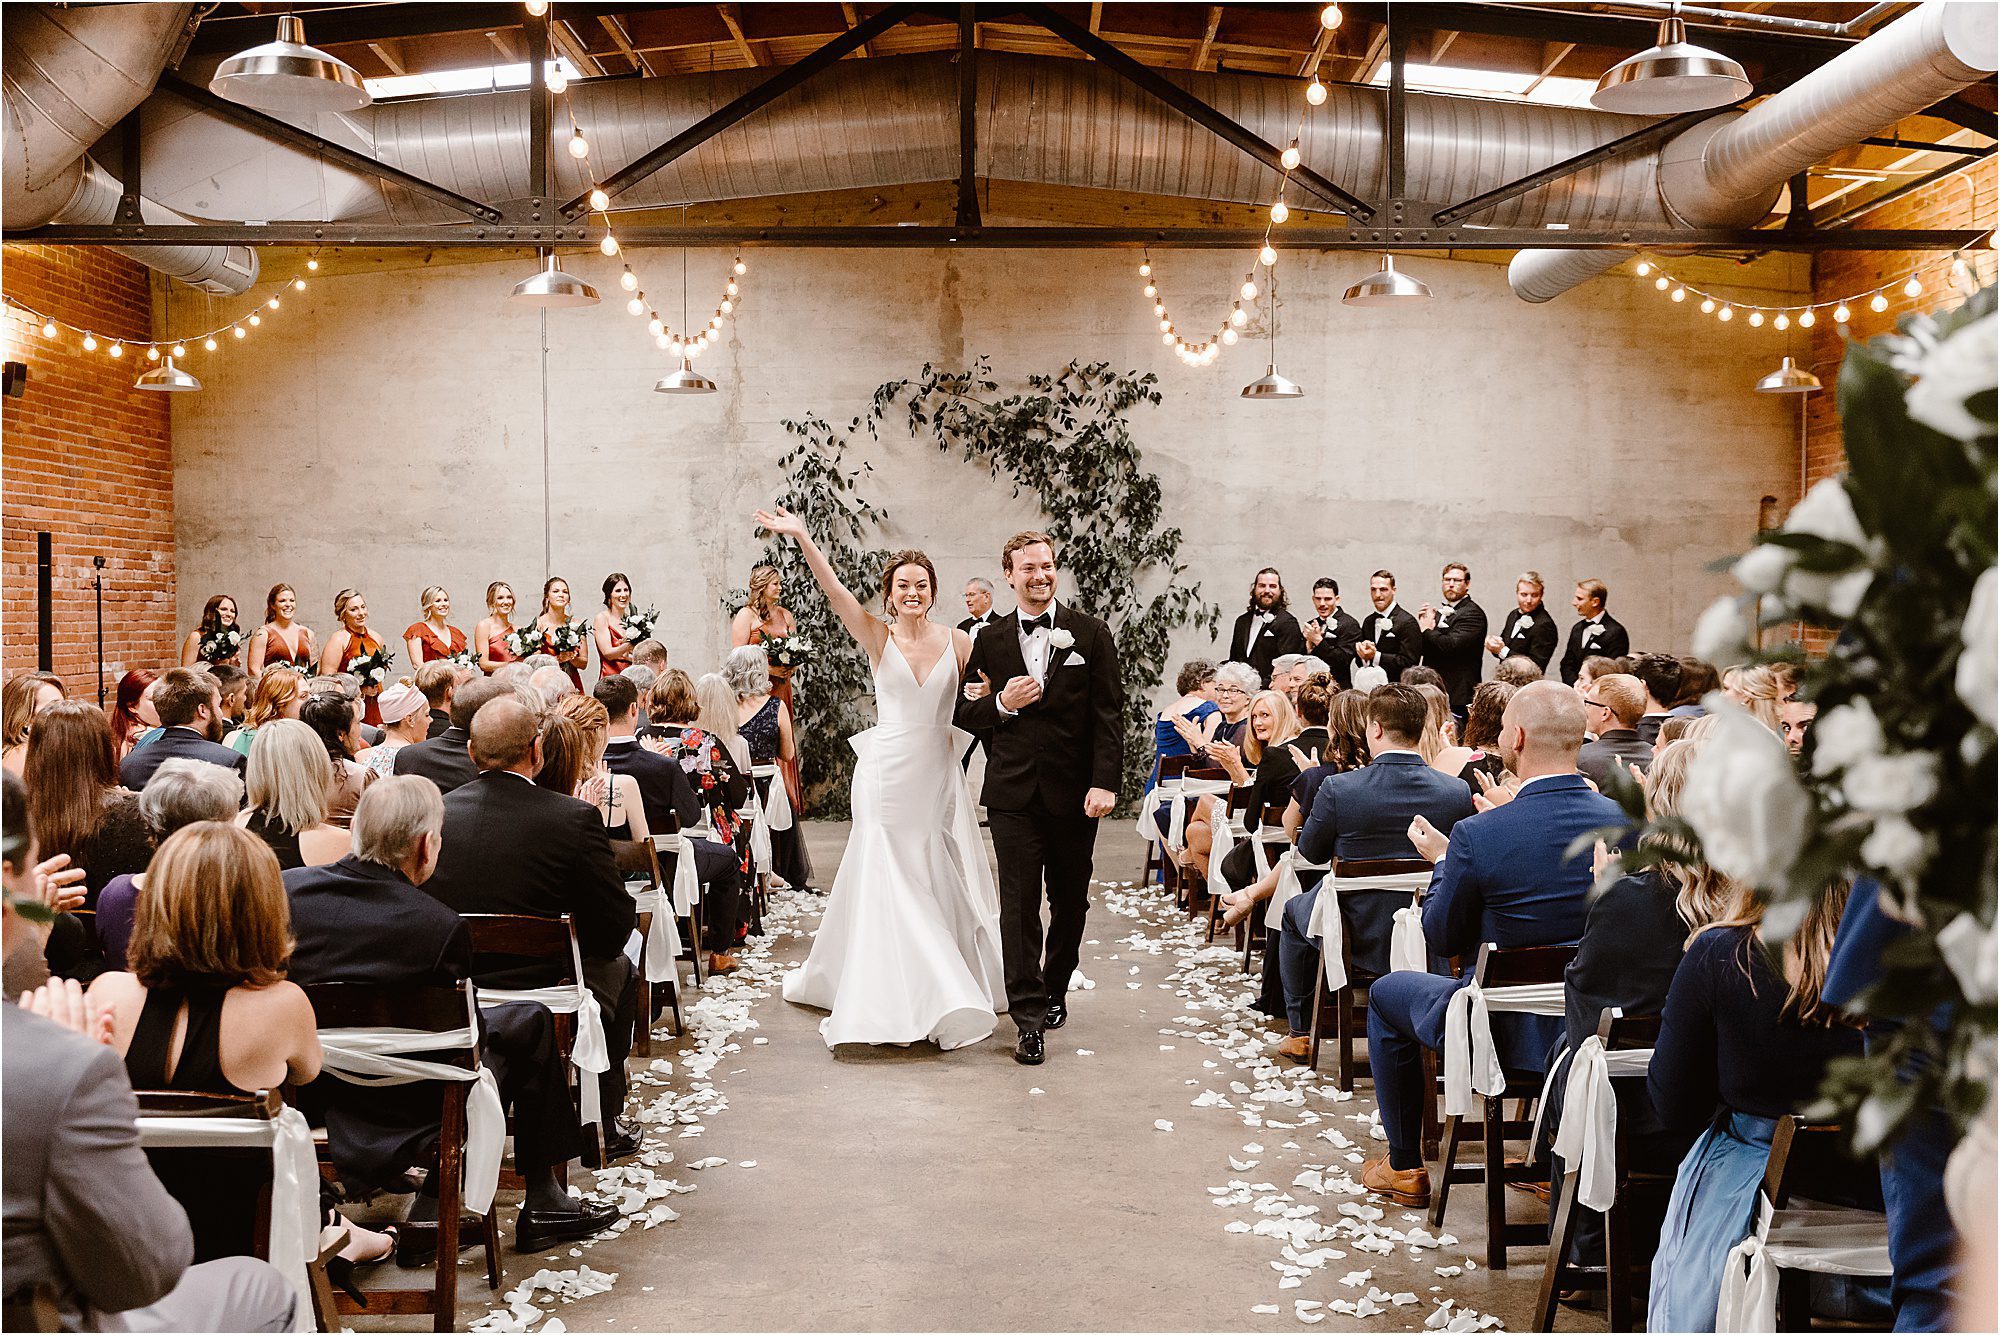 Black and White Wedding Showcases Party Vibes